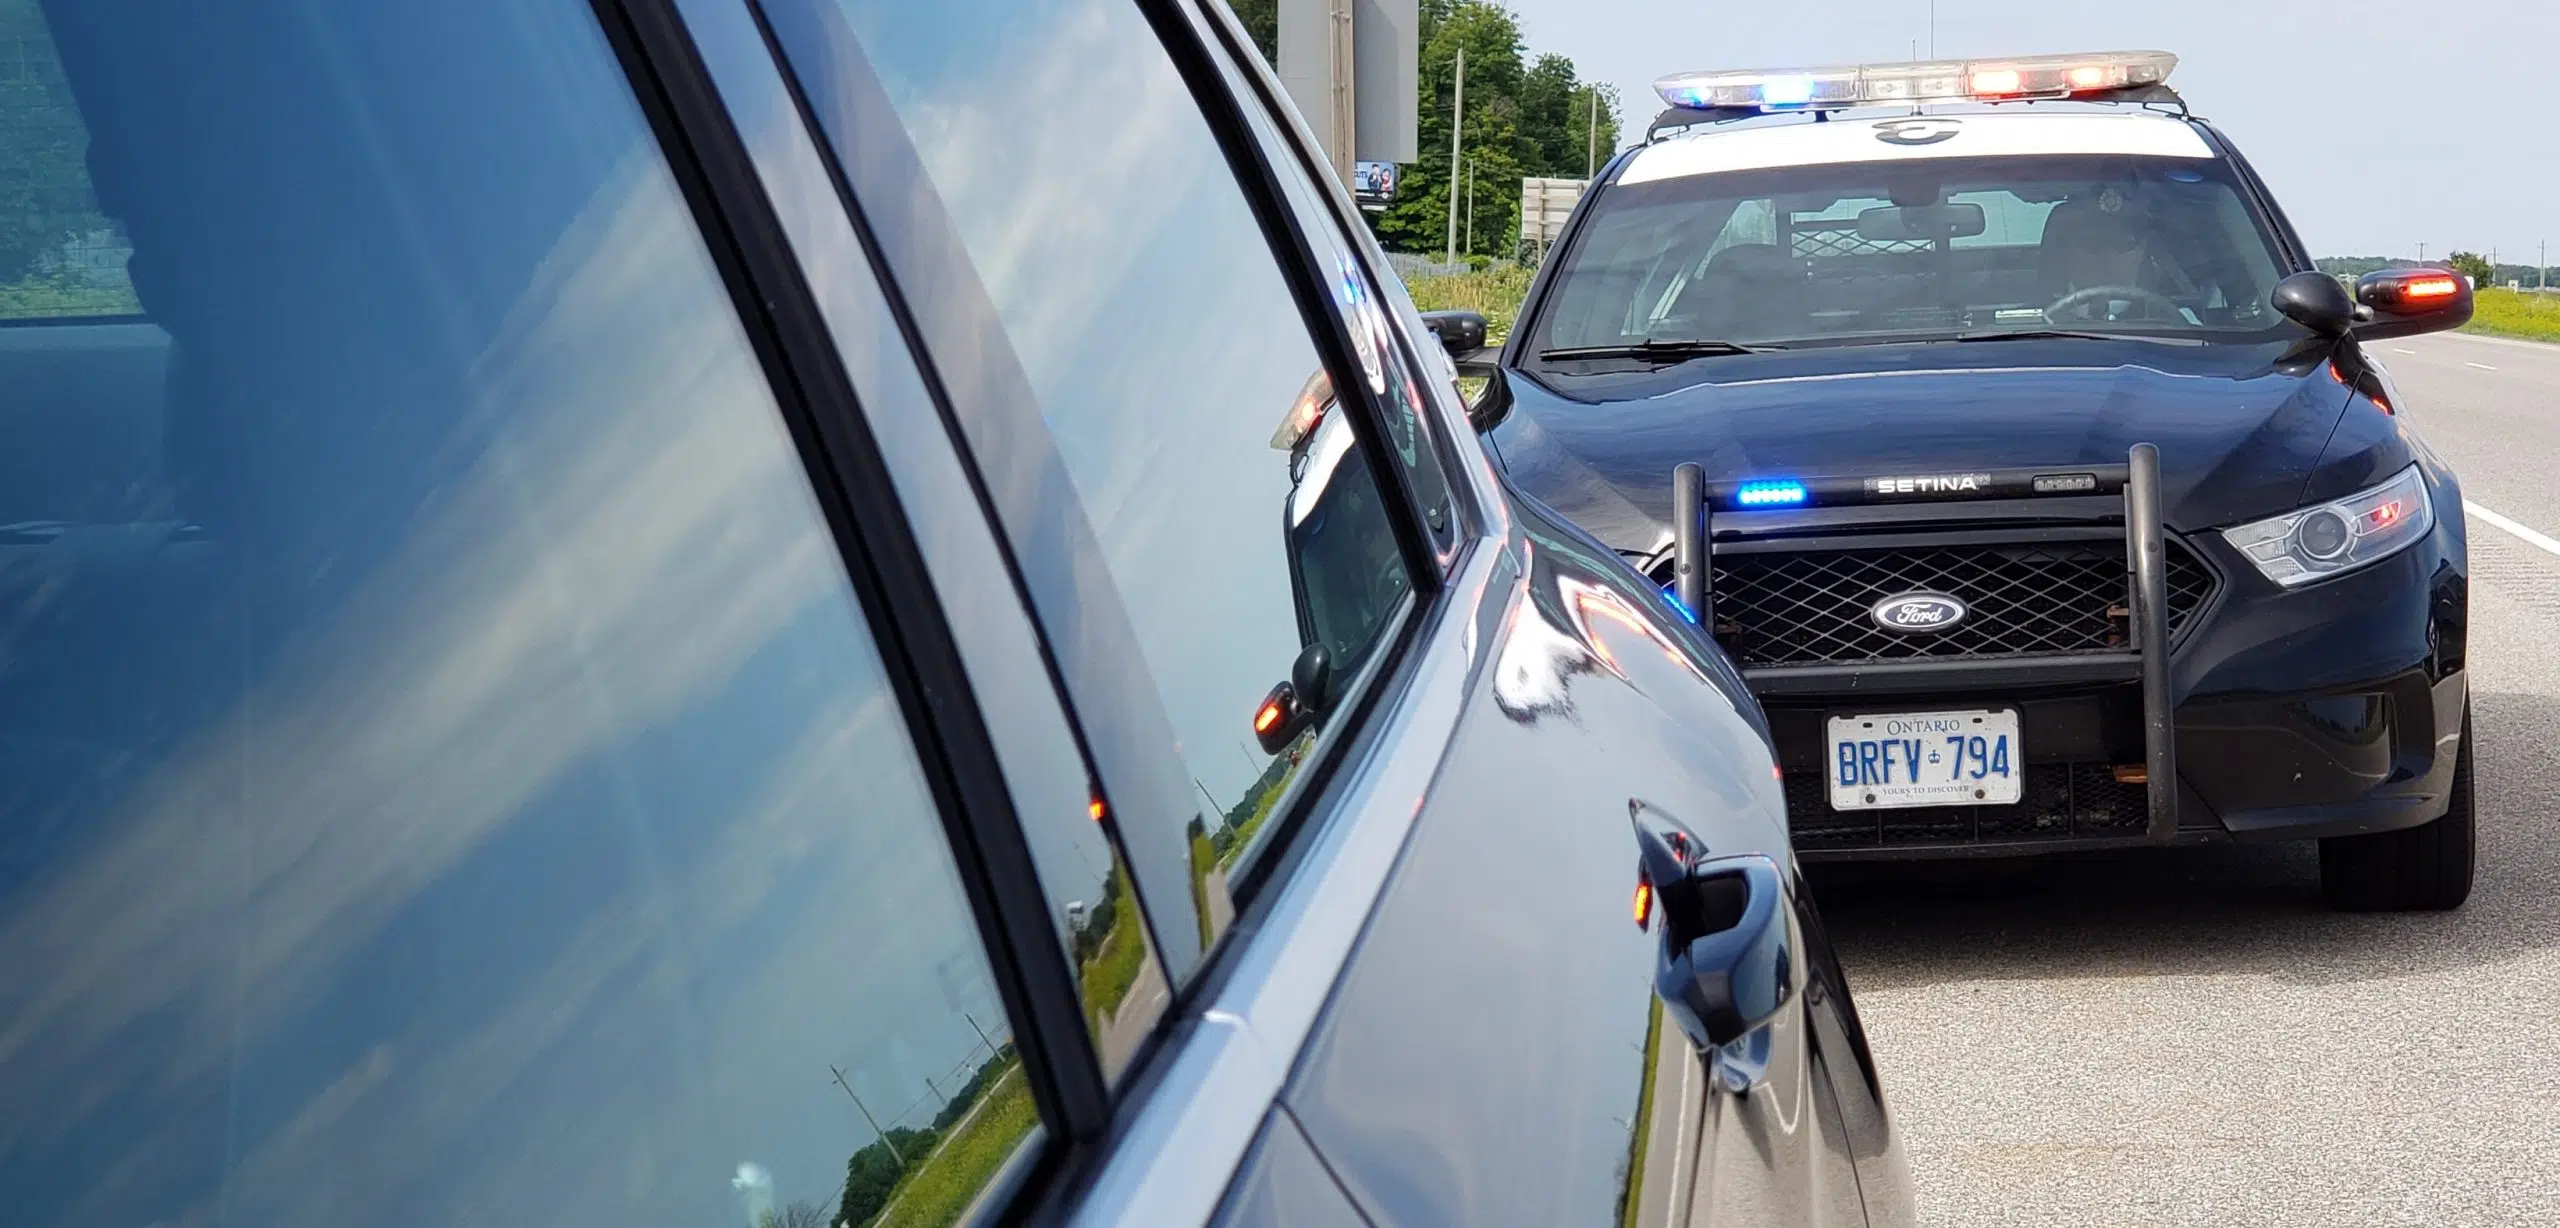 Two Toronto teens charged after OPP stop stolen vehicles